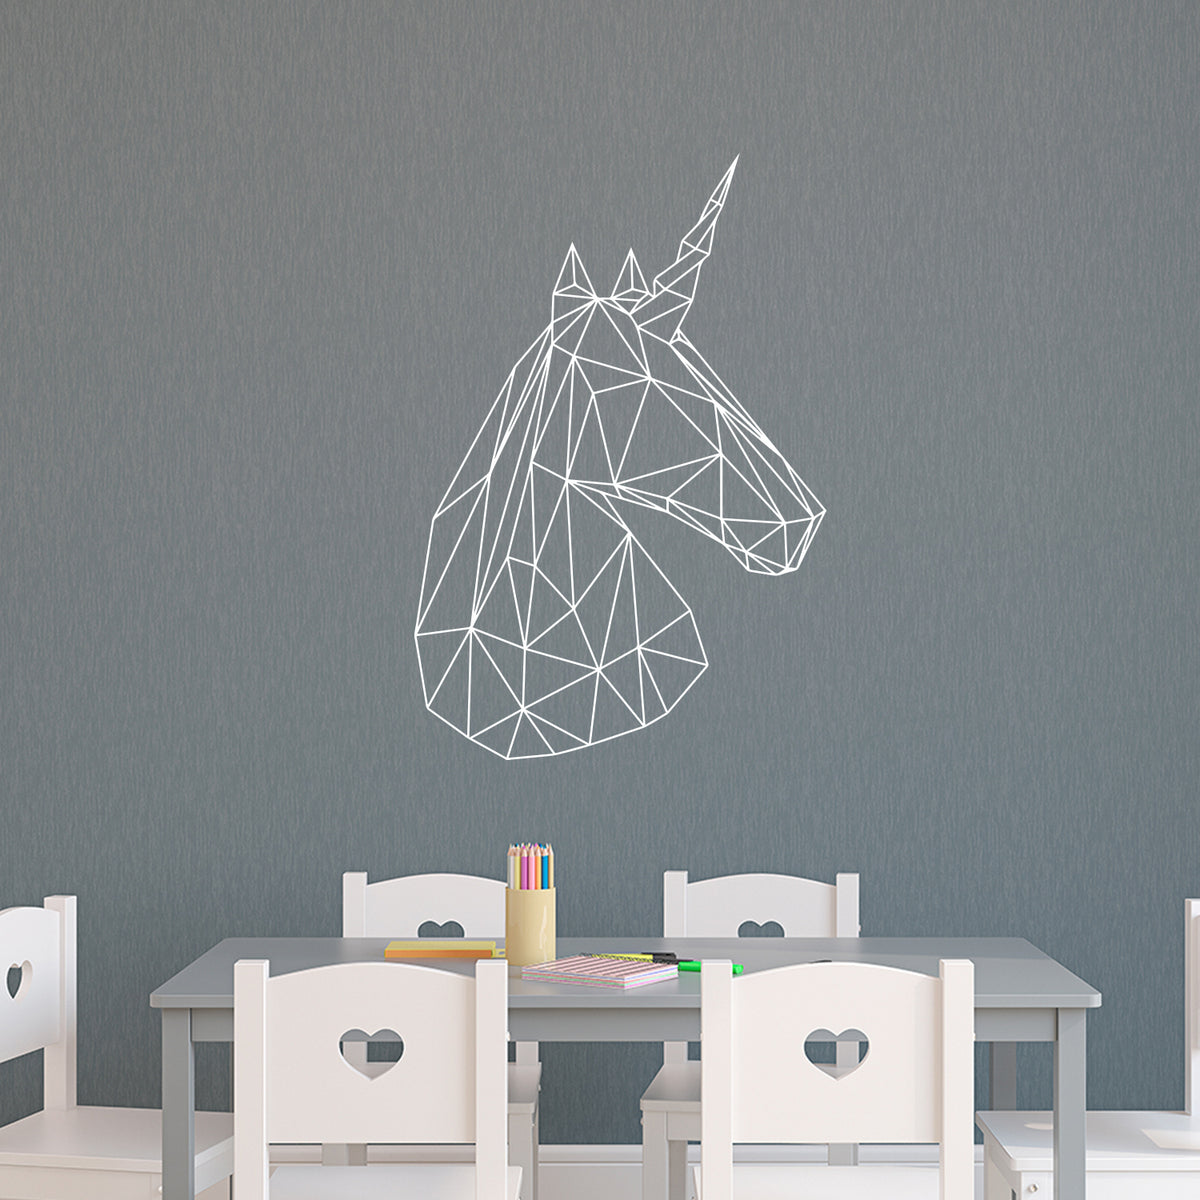 Beautiful Geometric Home Work Place Stencil Adhesives 34 x 23 Unicorn Head 34 x 23, Black Outline Decal for Office Living Room Bedroom Dorm Room Decor Vinyl Wall Art Decals 